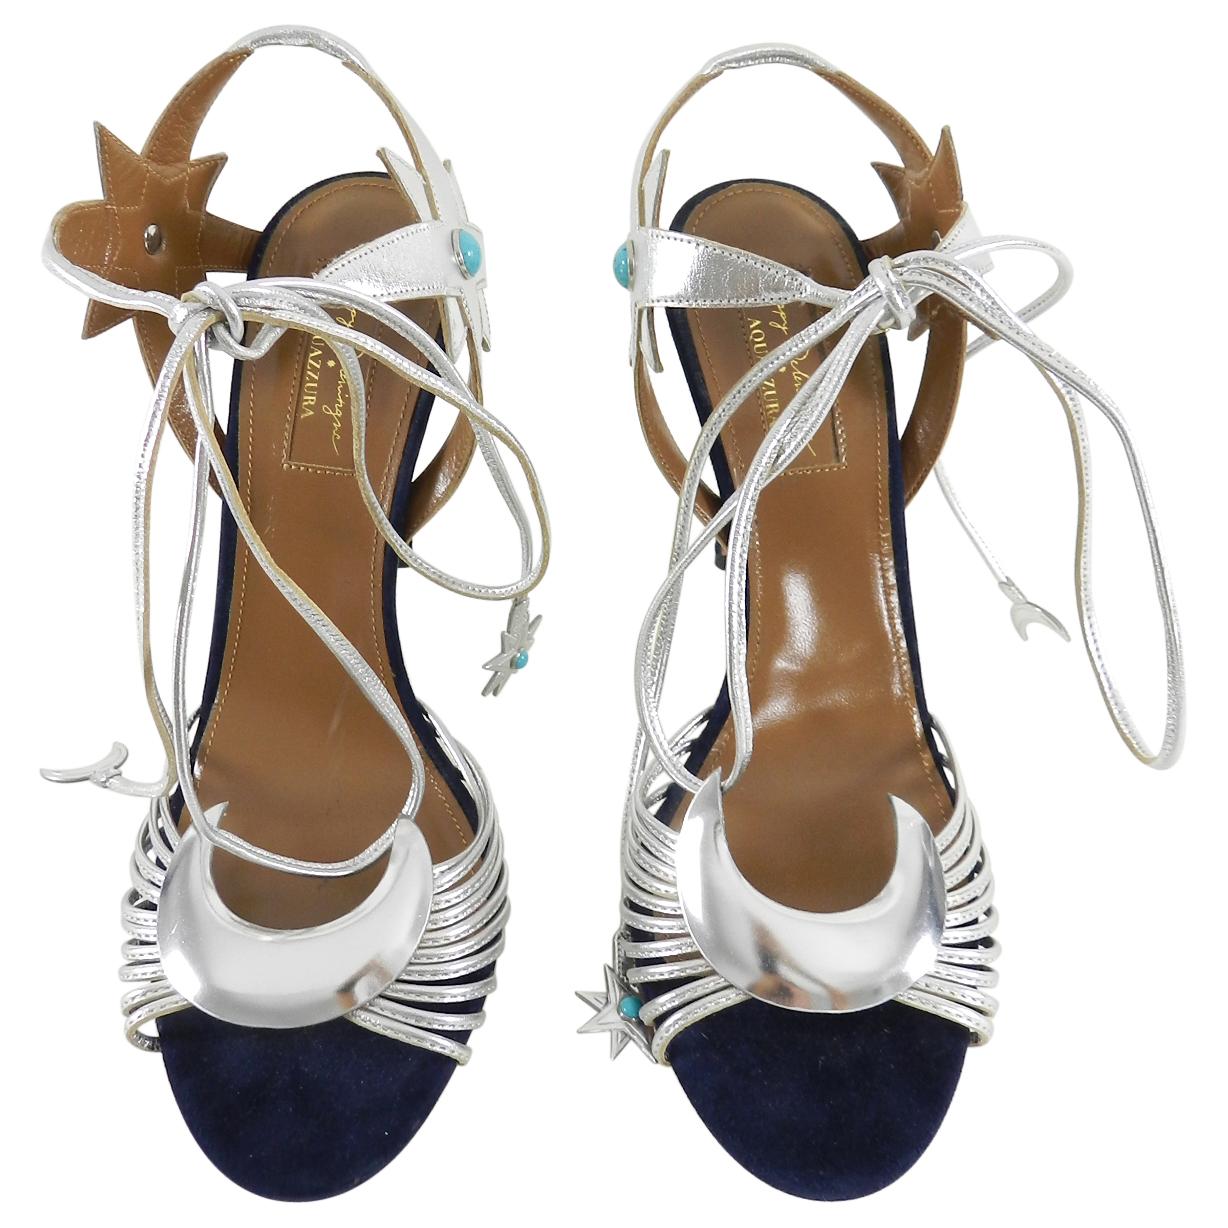 Brown Aquazzura by Poppy Delevingne Midnight Navy and Silver Sandals 